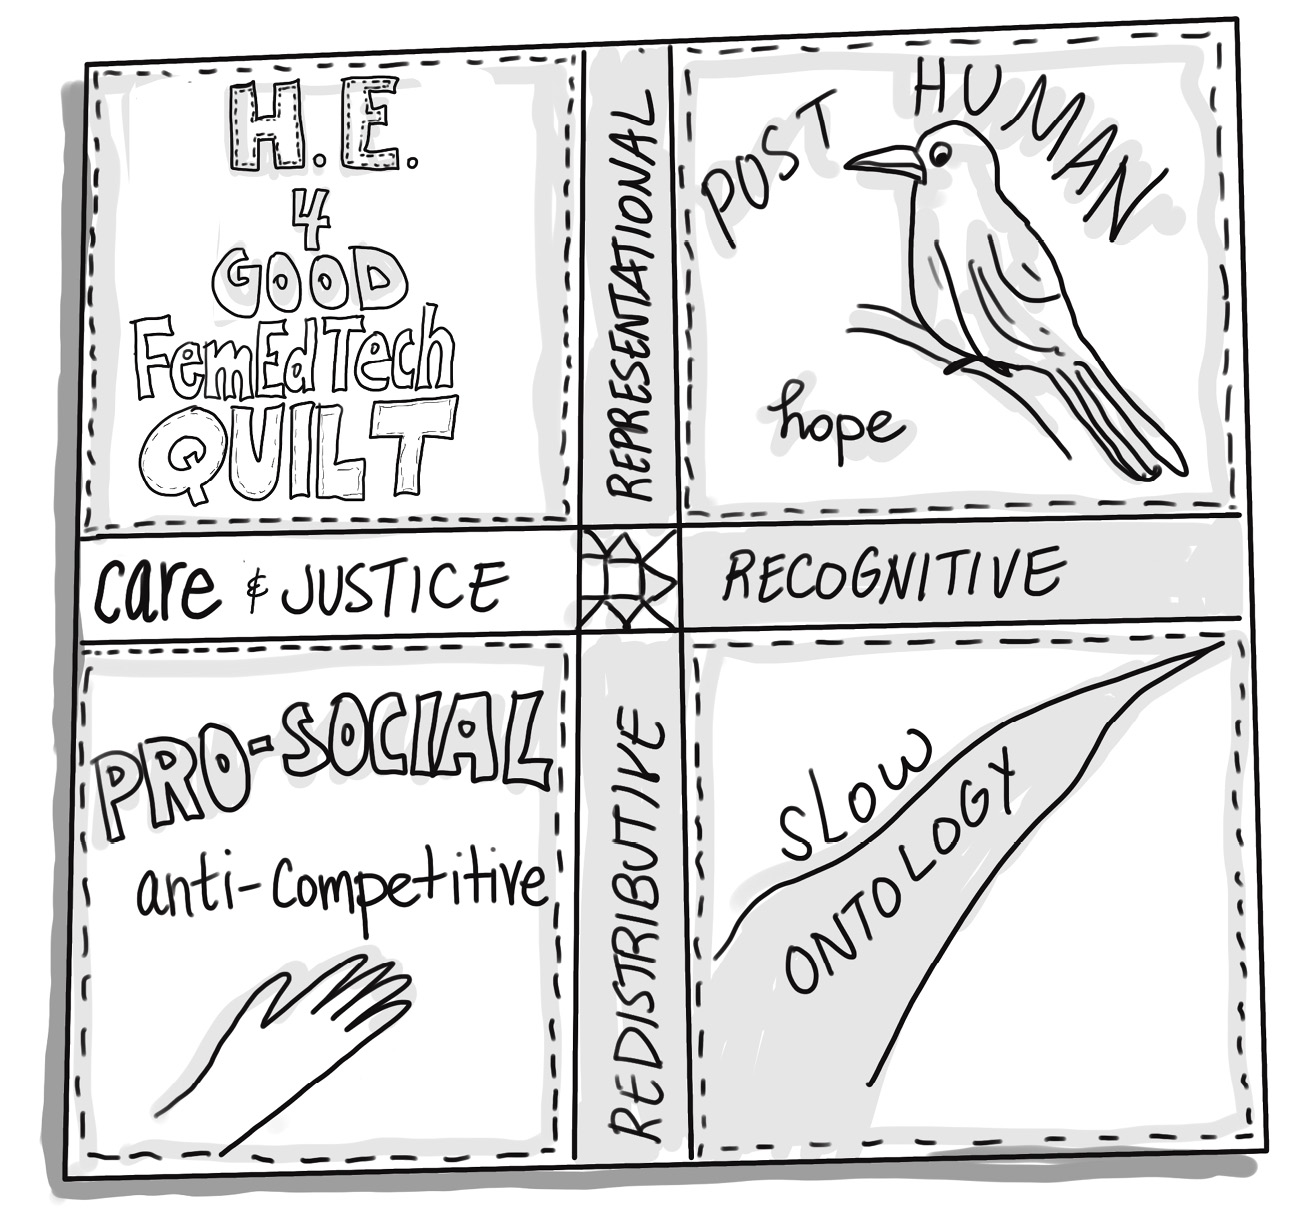 Sketch of a quilt made of four sections put together in two layers, one above the other. The first section reads: Higher Education for Good FemEdTech Quilt. The following one reads ìPosthuman hopeî and features the drawing of a bird sitting on a branch. The next reads ìpro-social anti-competitiveî and features the drawing of a hand. The last one reads ìslow ontologyî. These four sections are delineated by four other sections intersecting in the centre and labelled ìrepresentational,î ìcare & justice,î ìrecognitive,î and îredistributiveî.